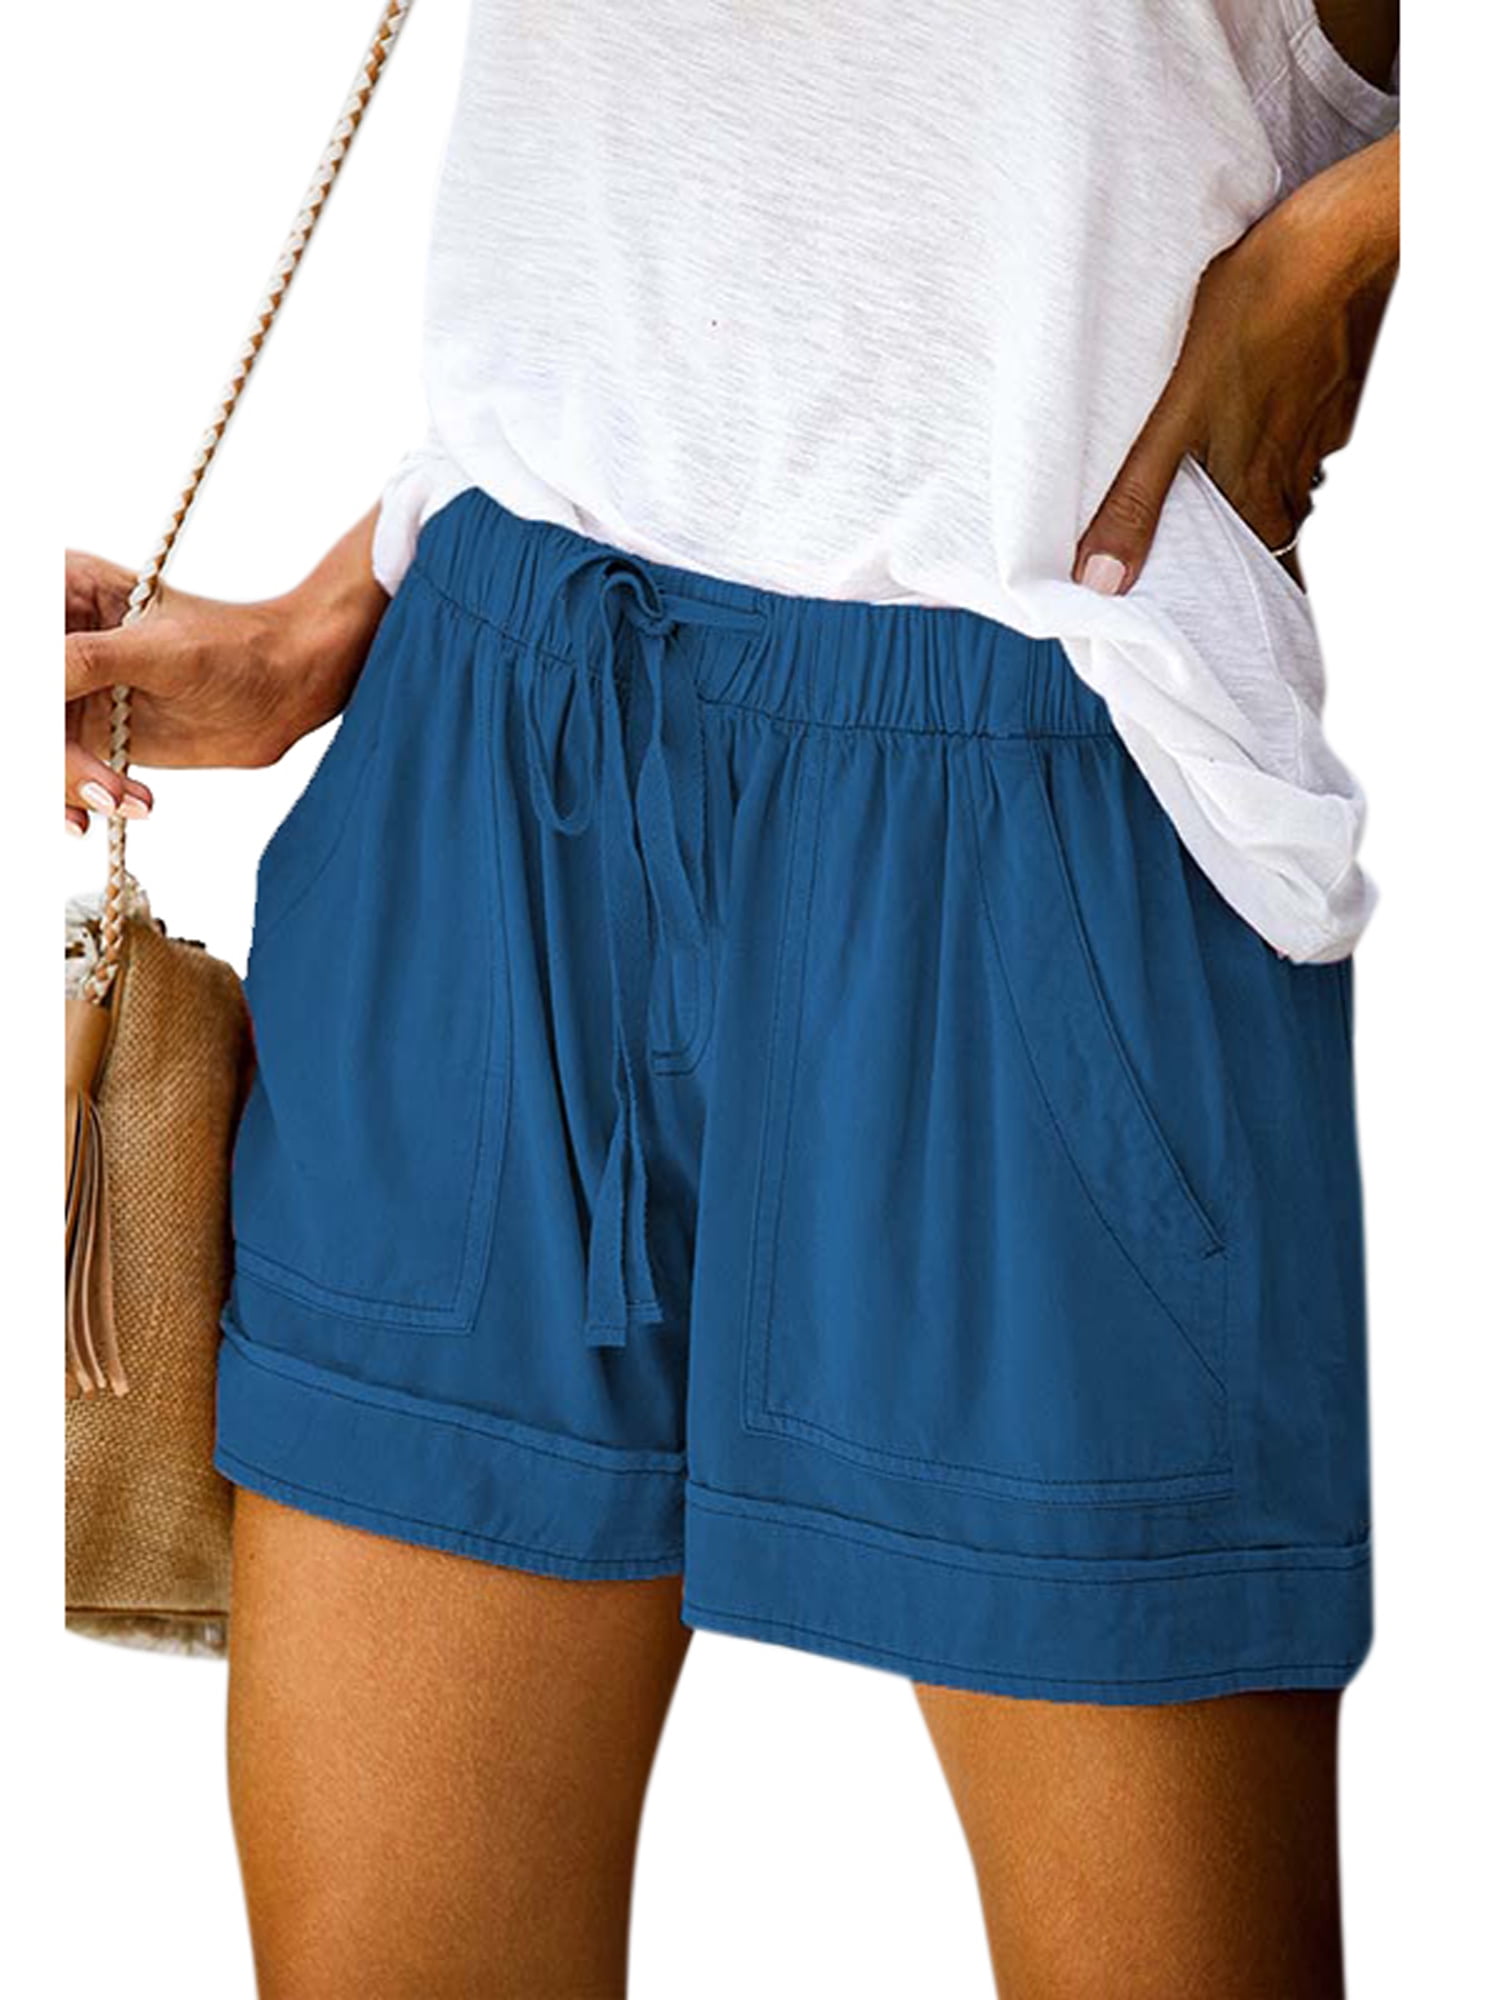 Sports & Outdoors Women's Plus Size Casual Shorts Wide Leg Summer Shorts with Pockets Loose Comfy Hot Short Pants S-3Xl